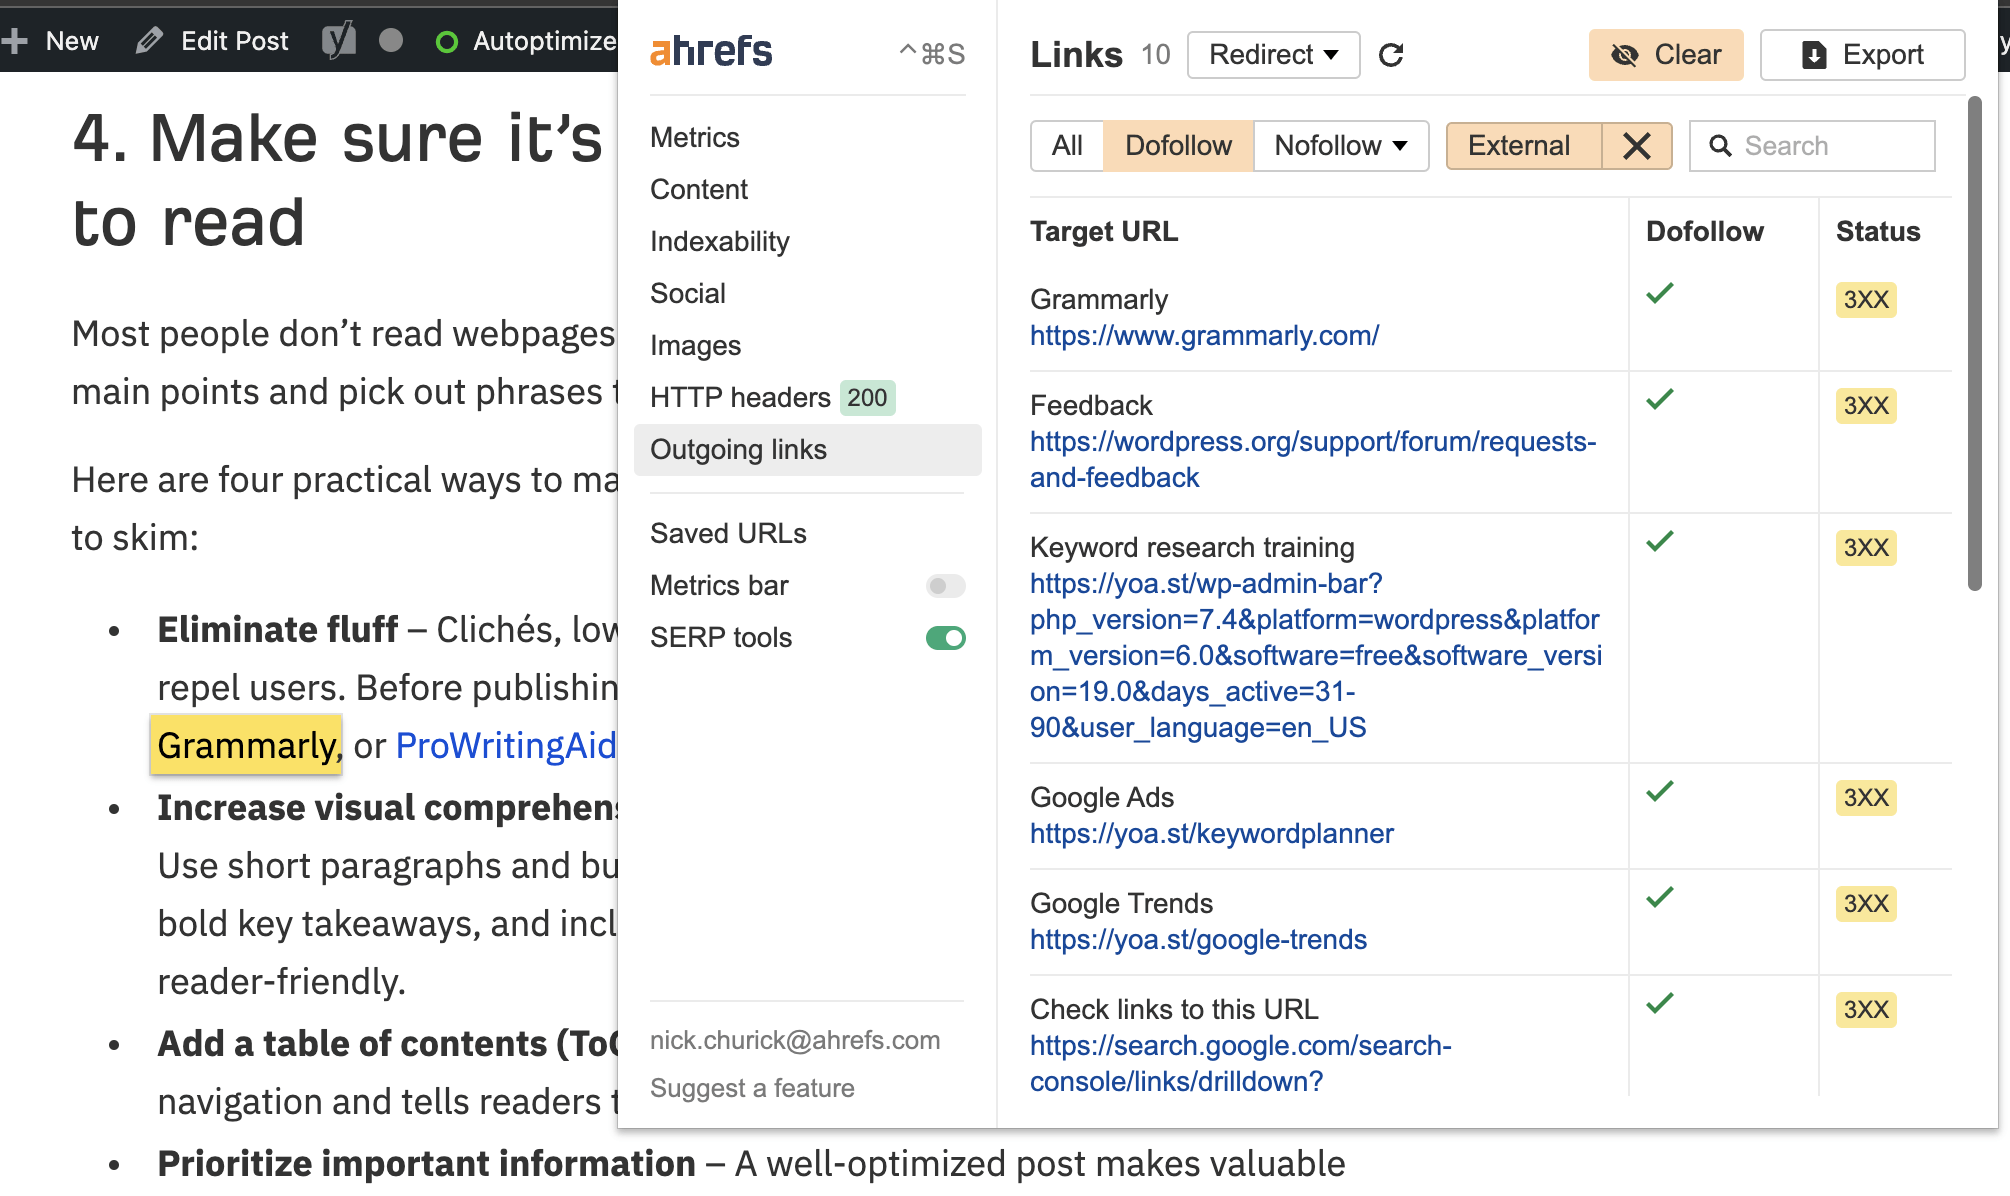 Checking outgoing links in Ahrefs' SEO Toolbar